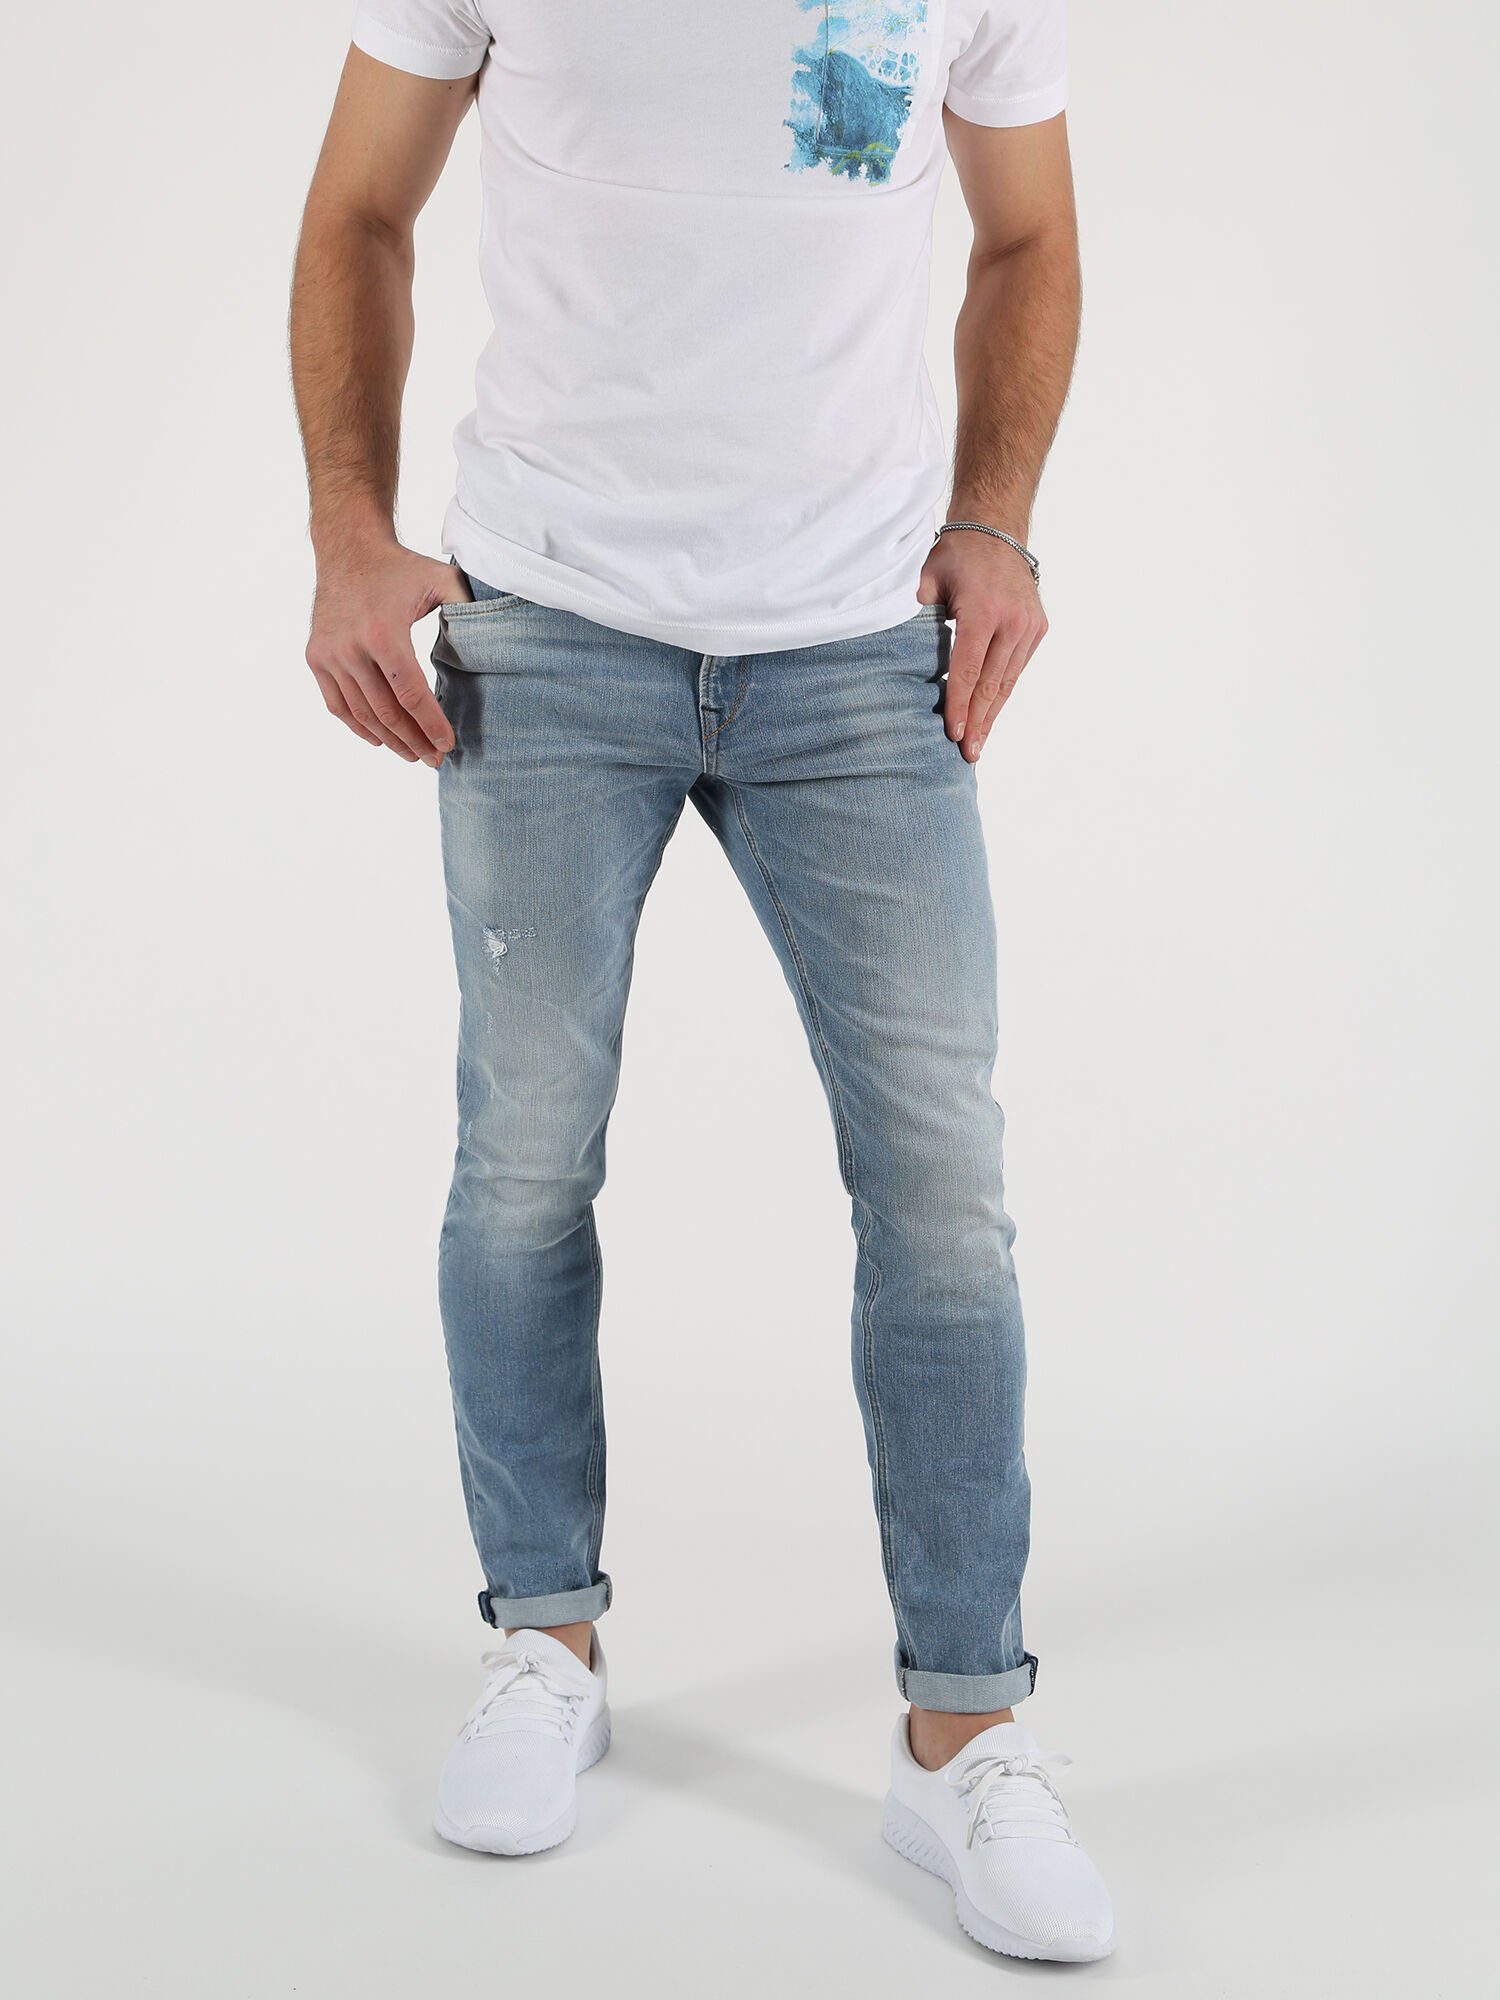 im of Slim-fit-Jeans Marcel Vermont Denim Miracle Blue 5-Pocket-Style